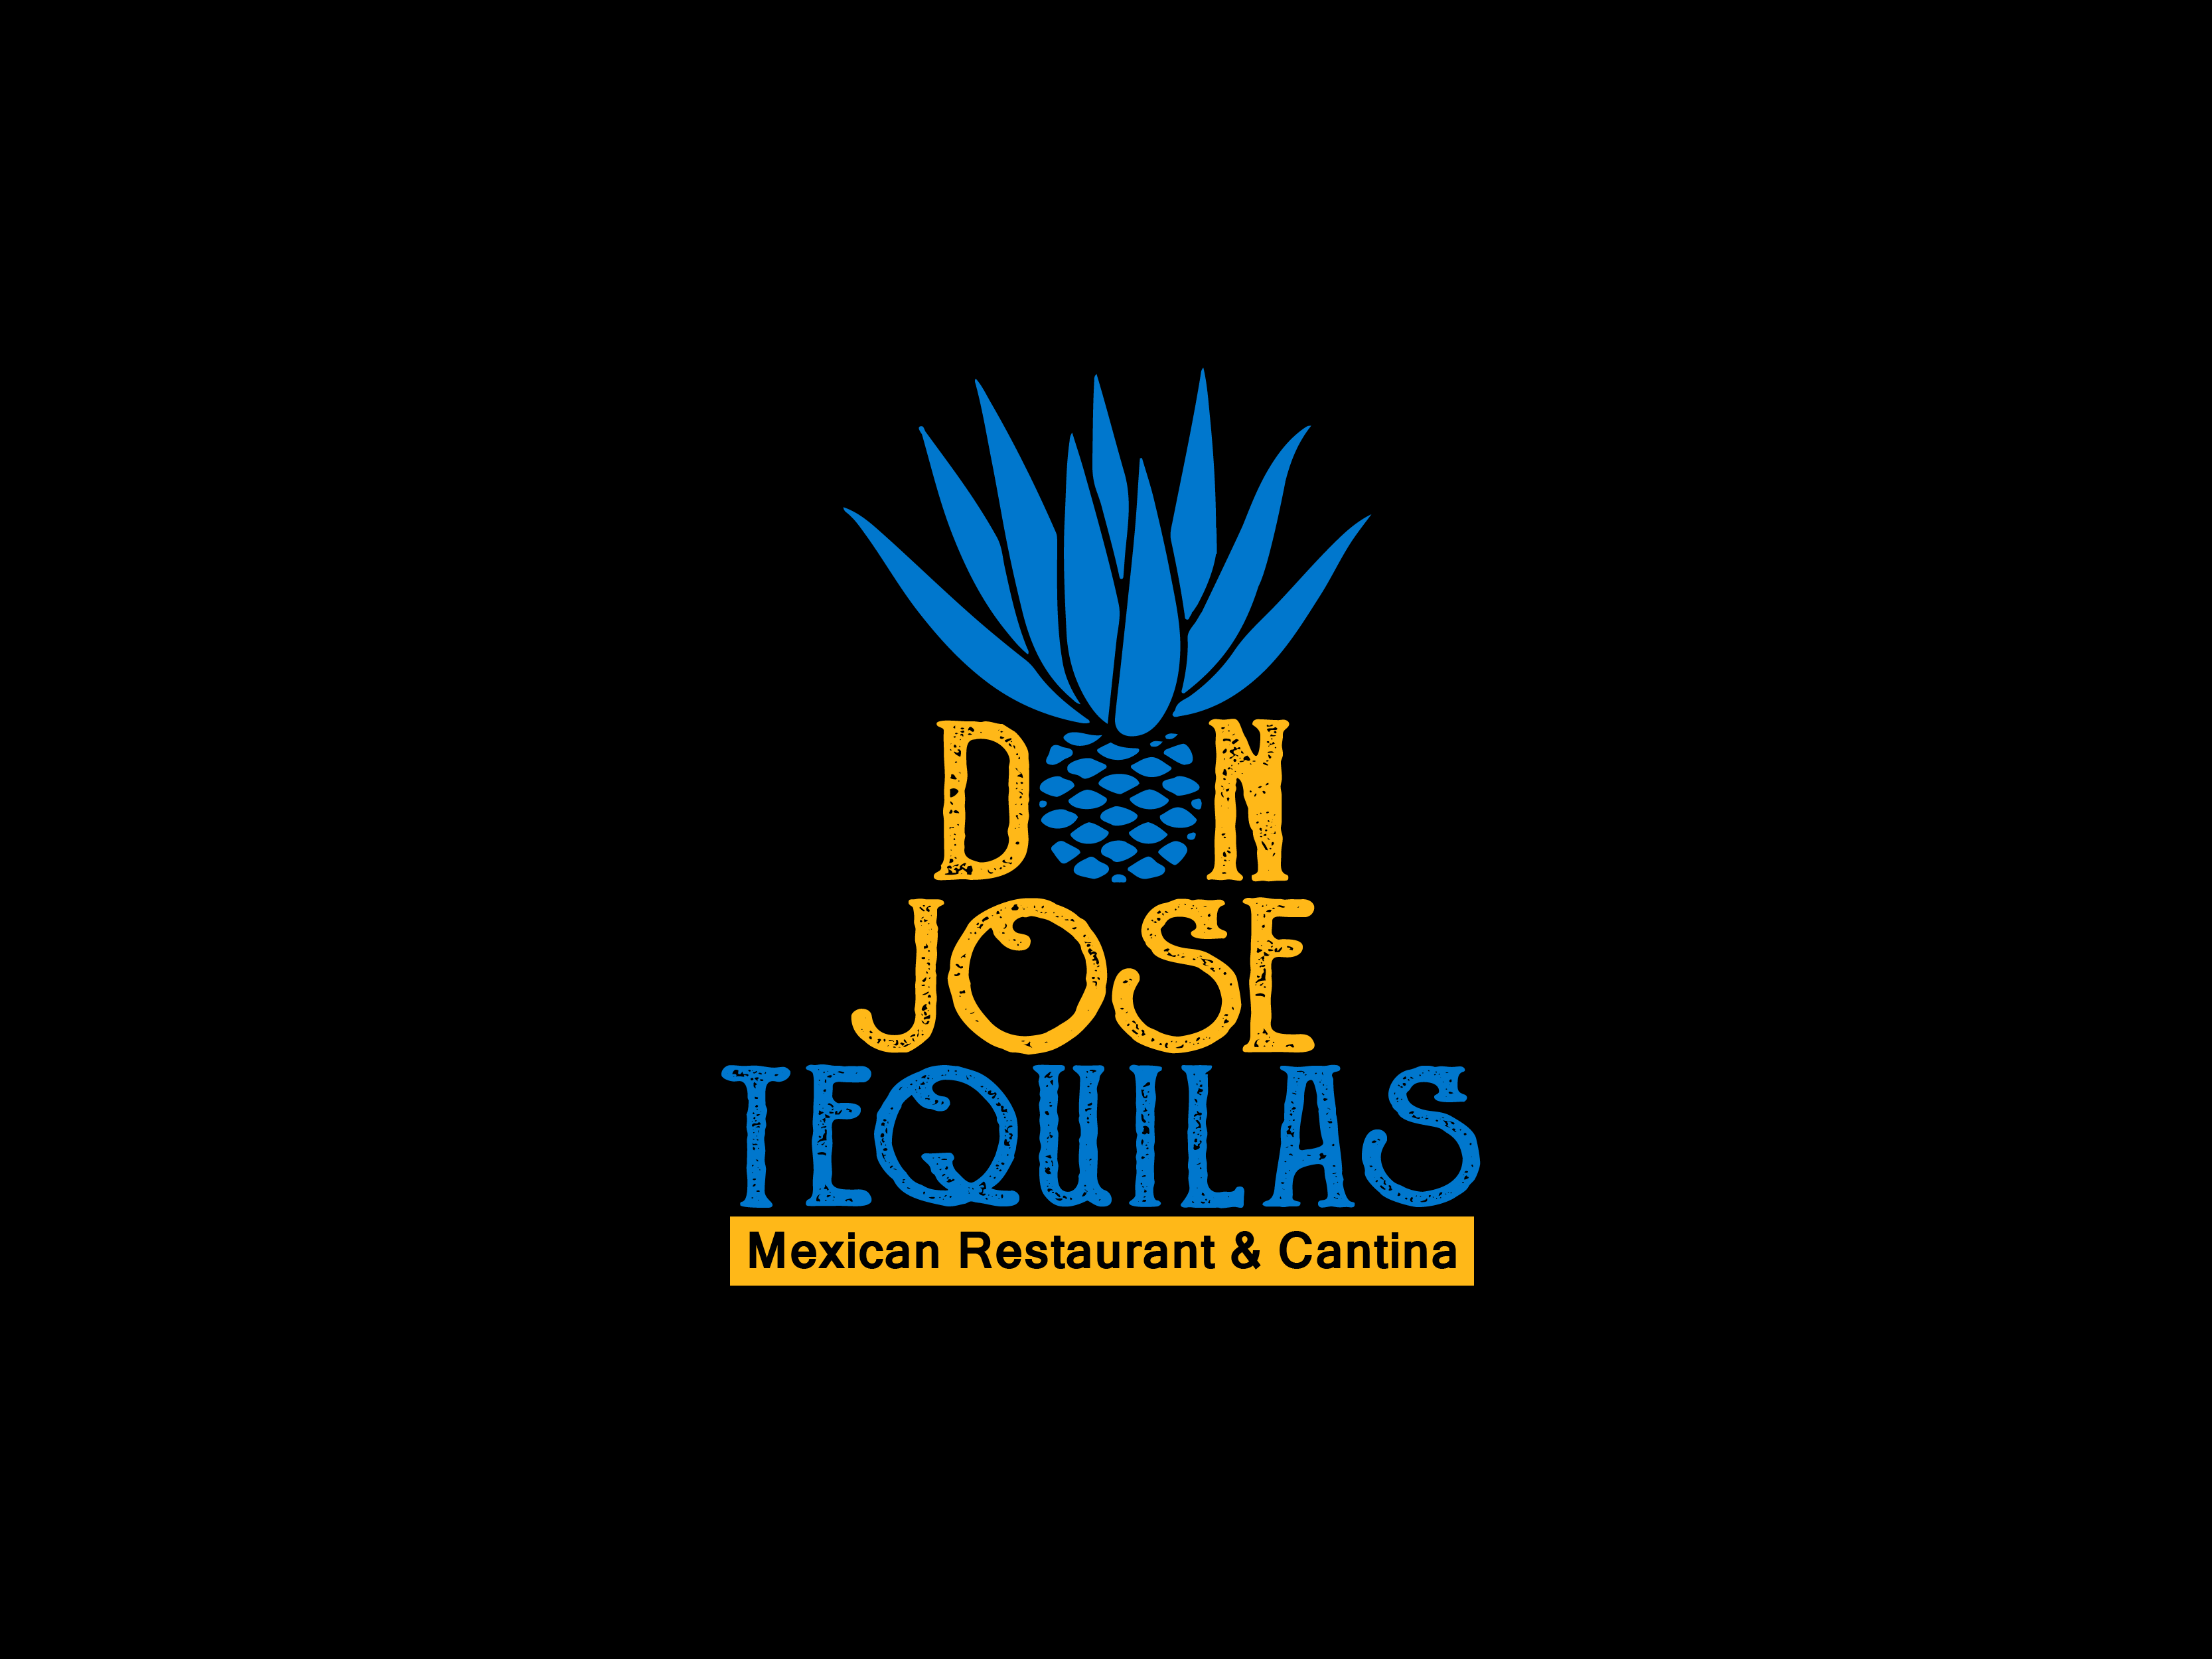 Don Jose Tequilas Restaurant 351 Atwells Ave